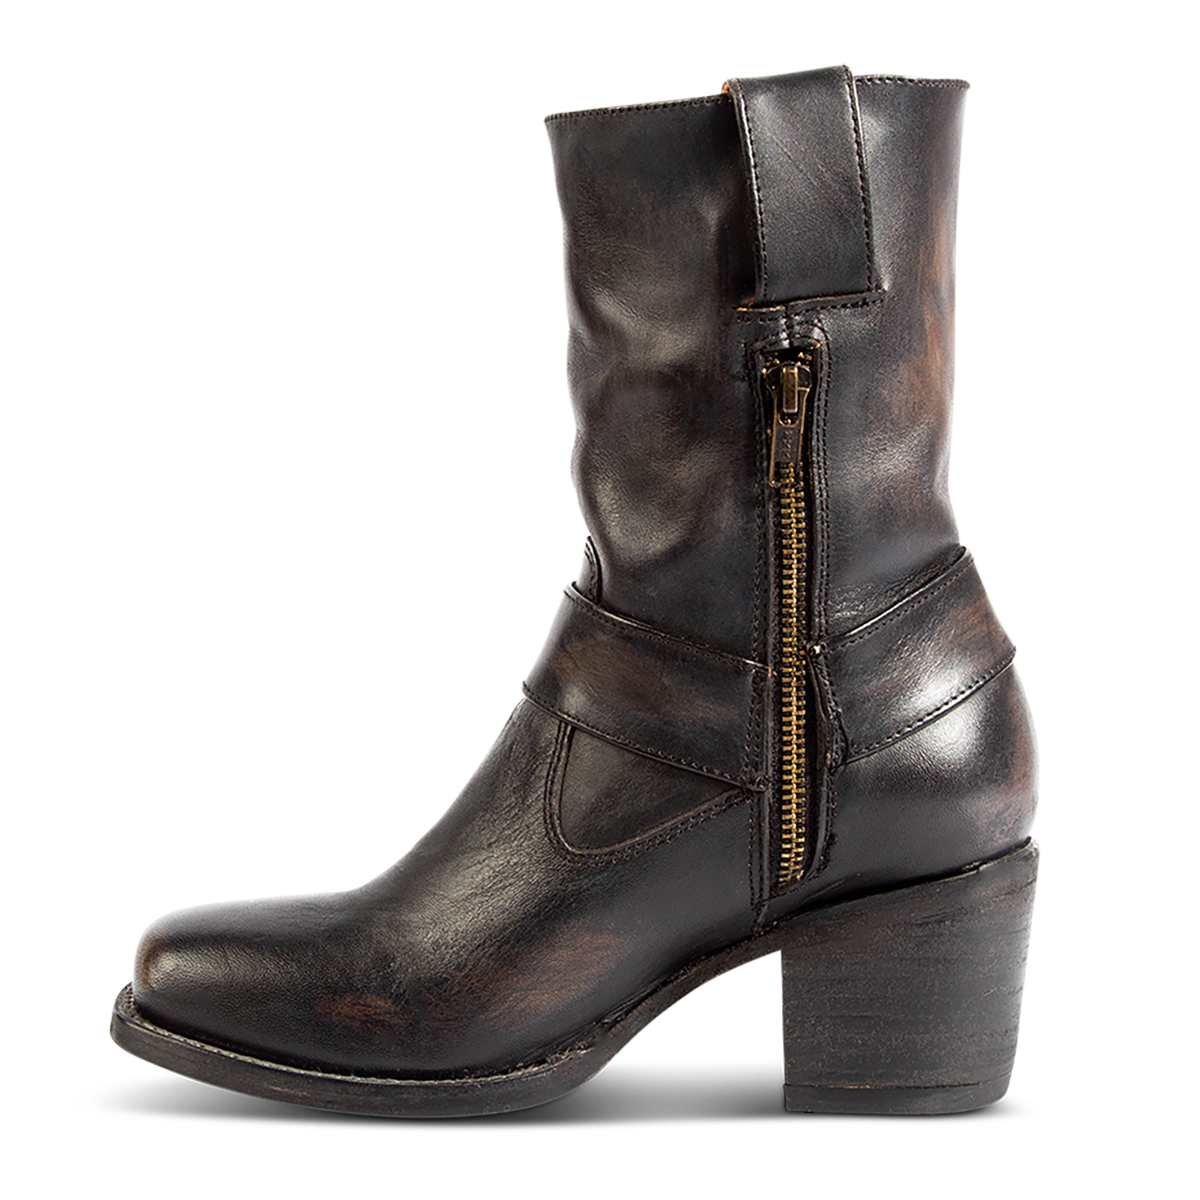 Inside view showing FREEBIRD women's Darcy black boot with leather pull straps, inside zip closure, and square toe